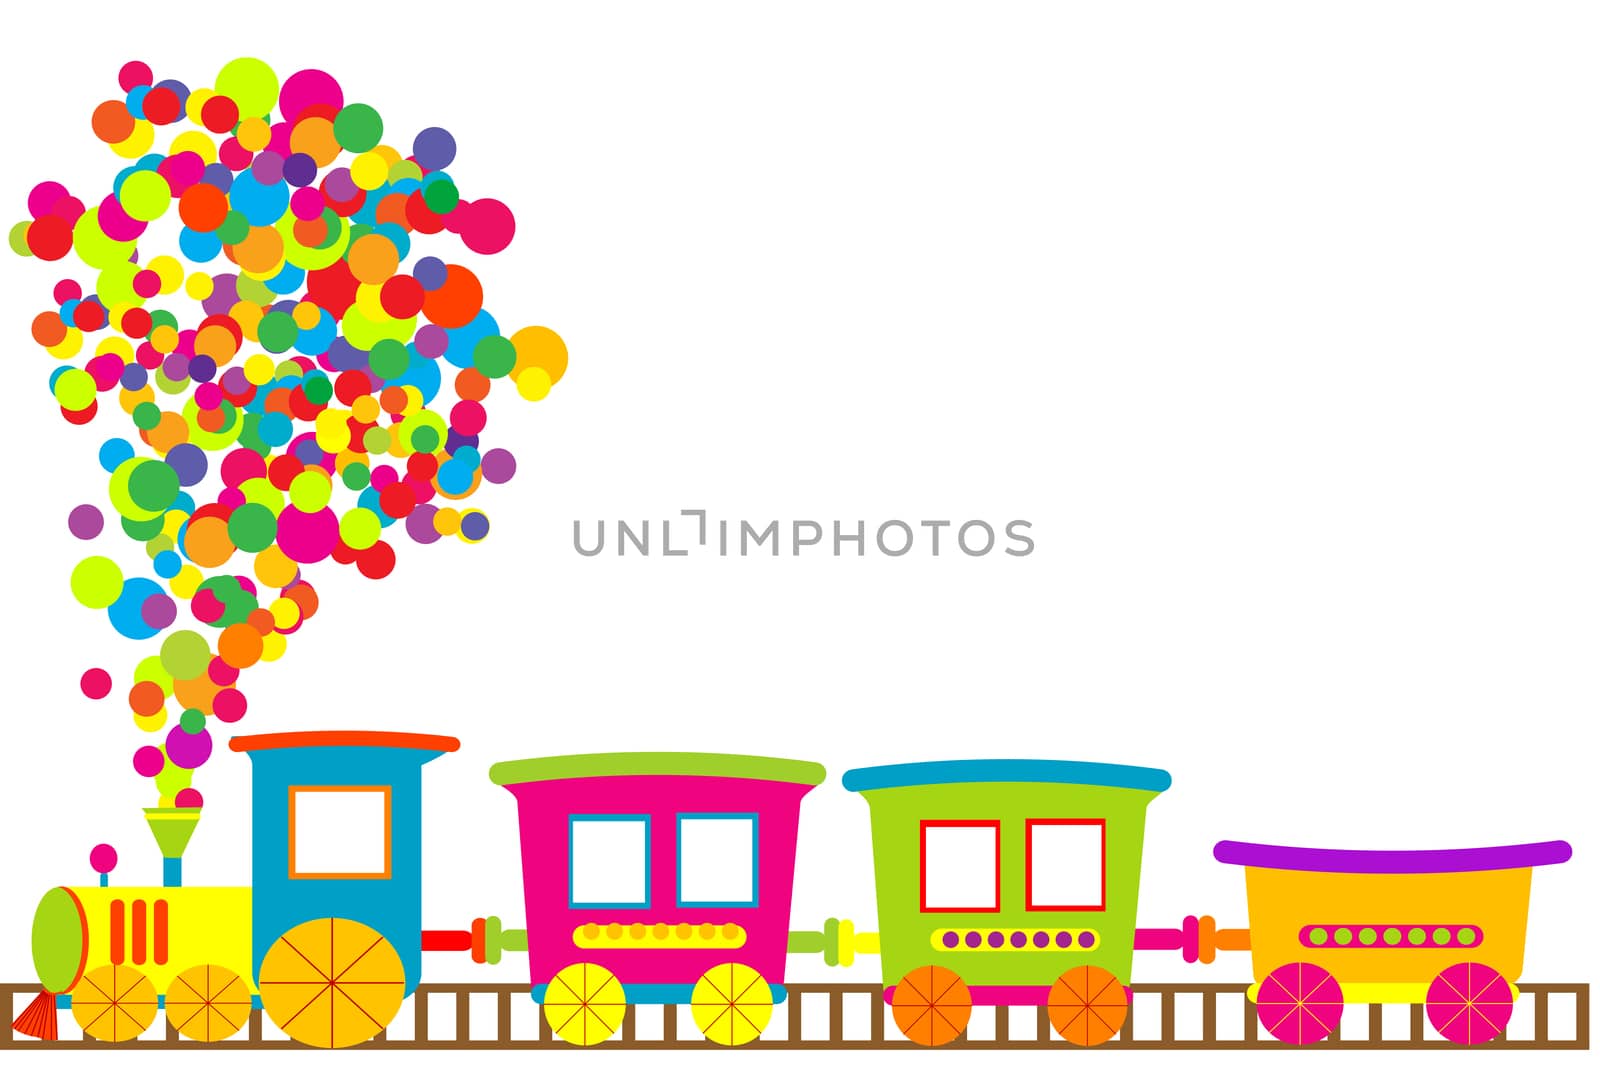 Colored toy train by hibrida13